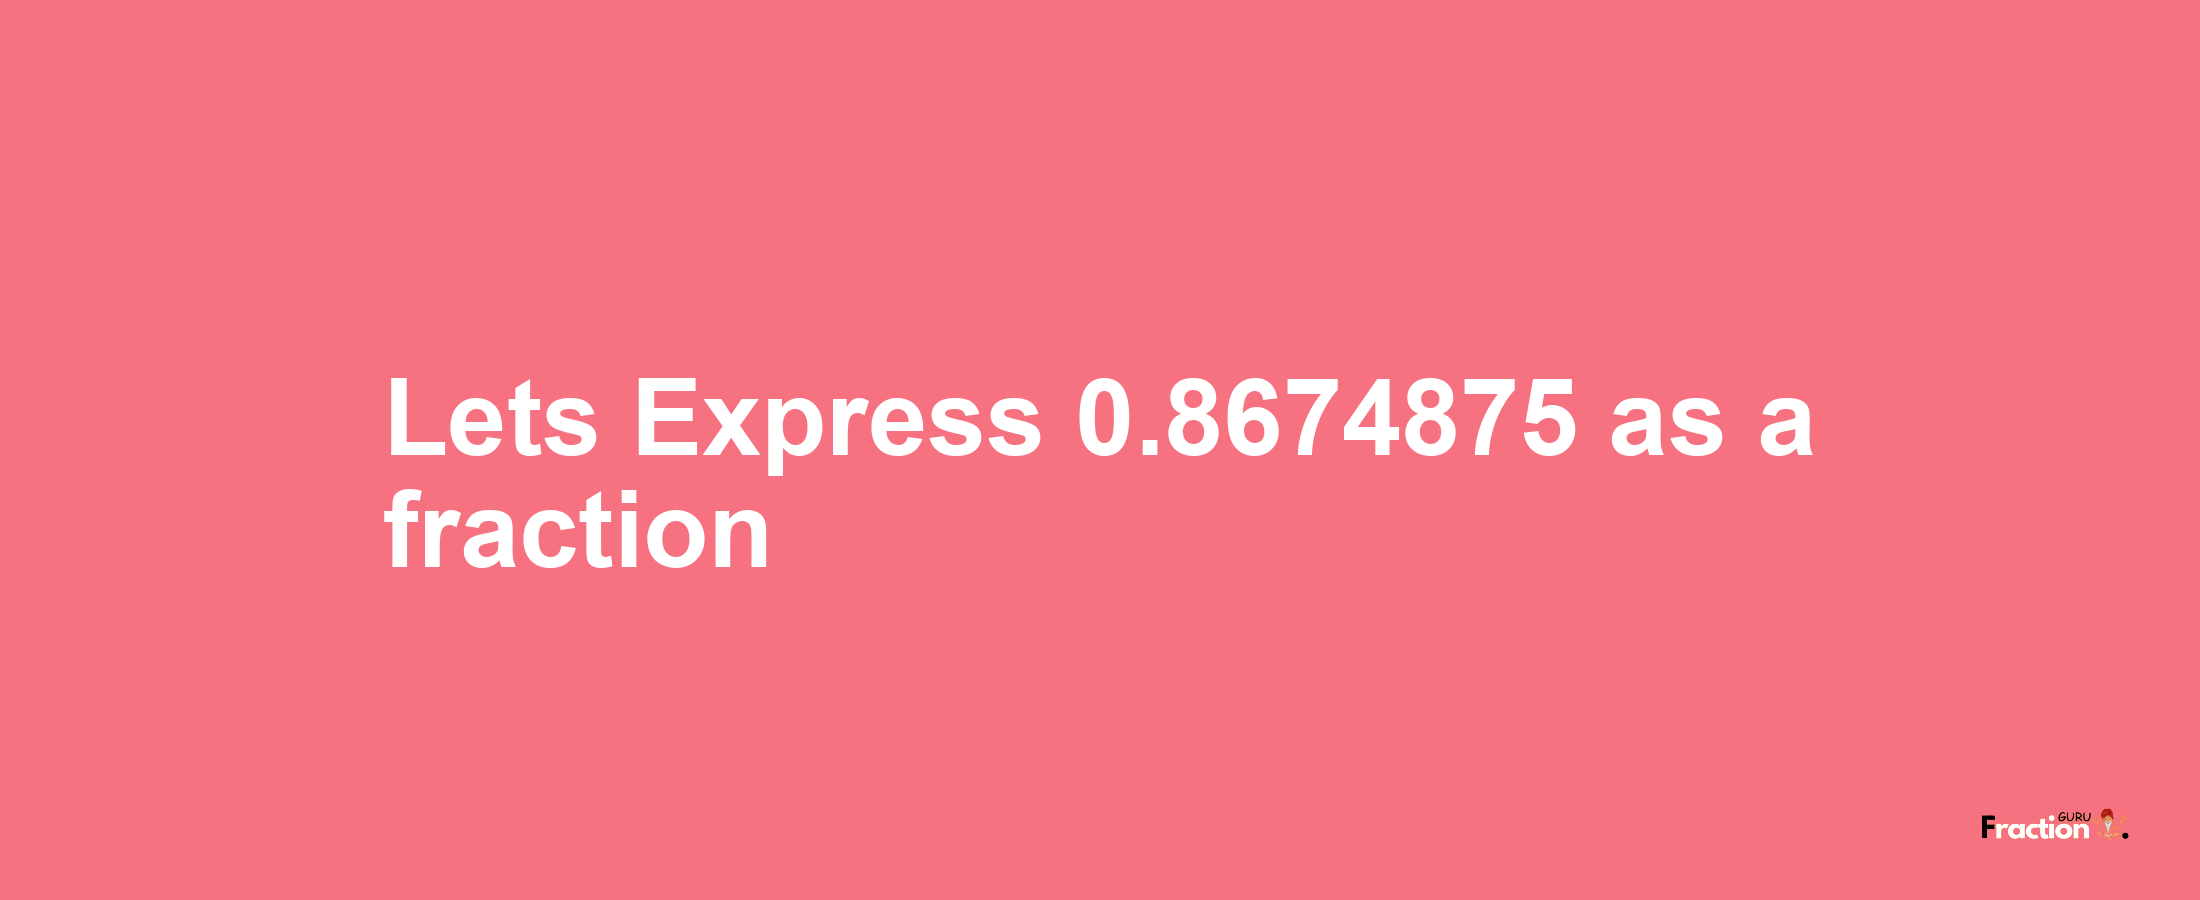 Lets Express 0.8674875 as afraction